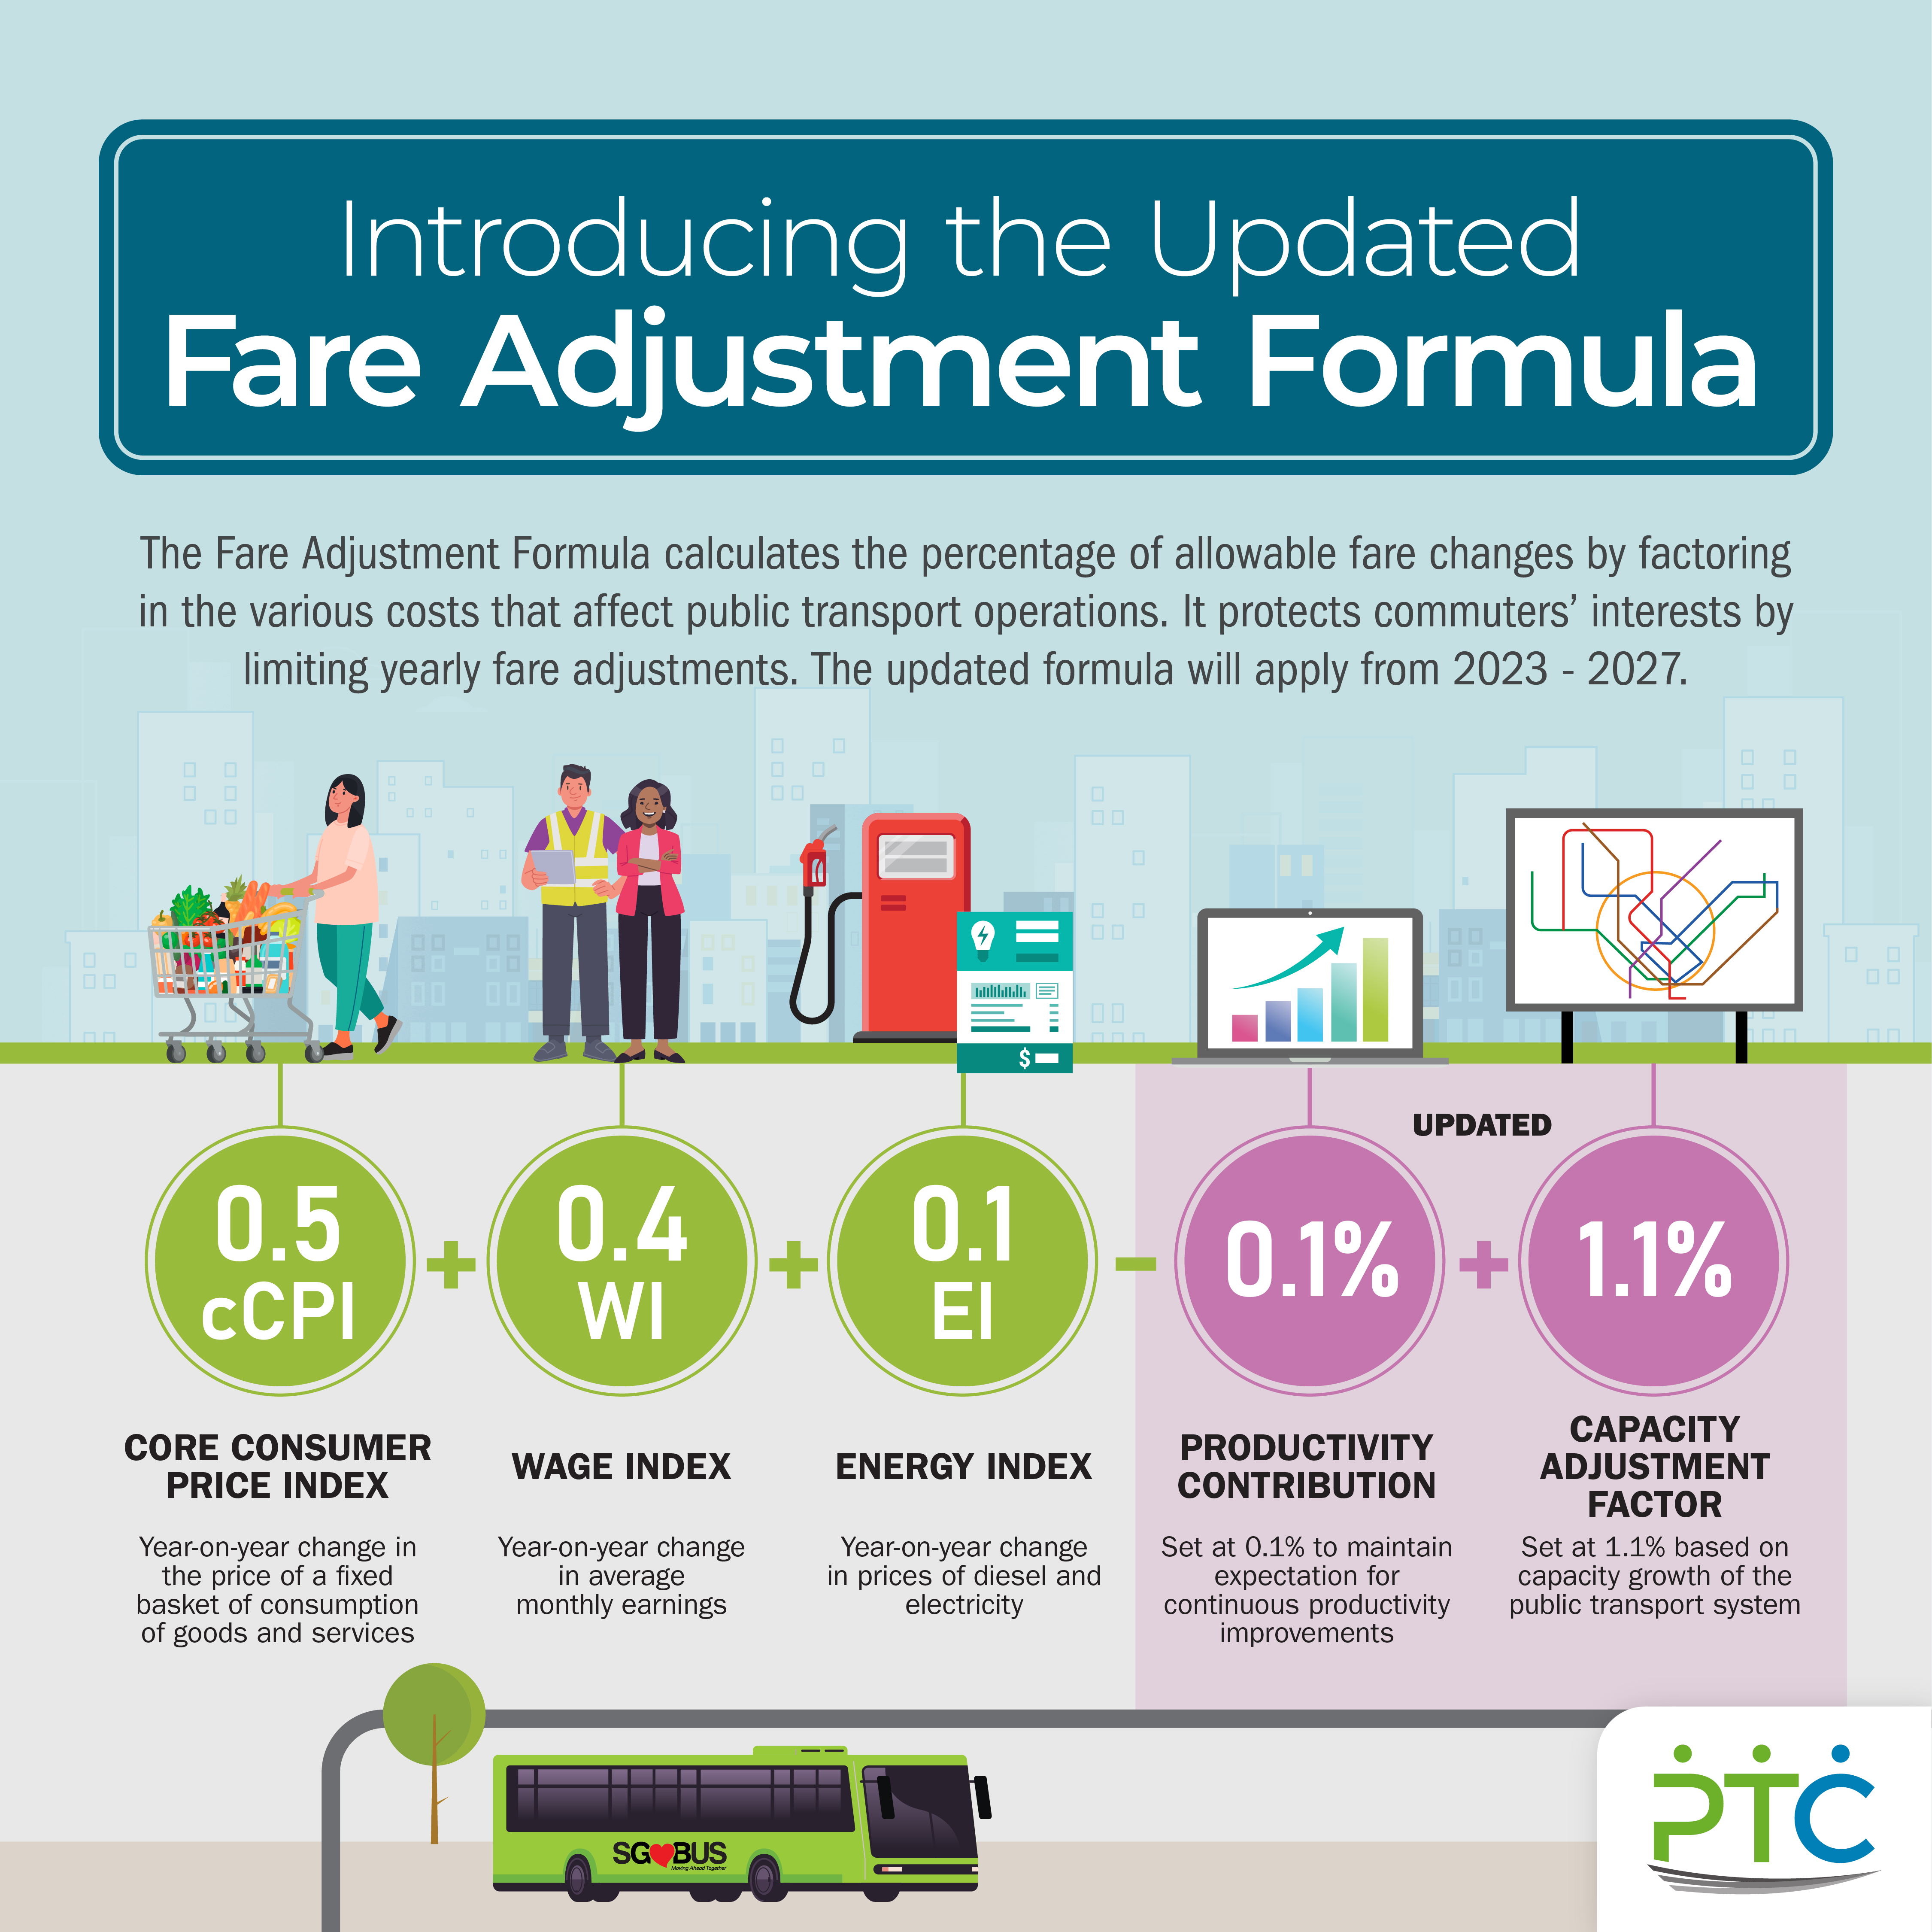 Introducing the Updated Fare Adjustment Formula